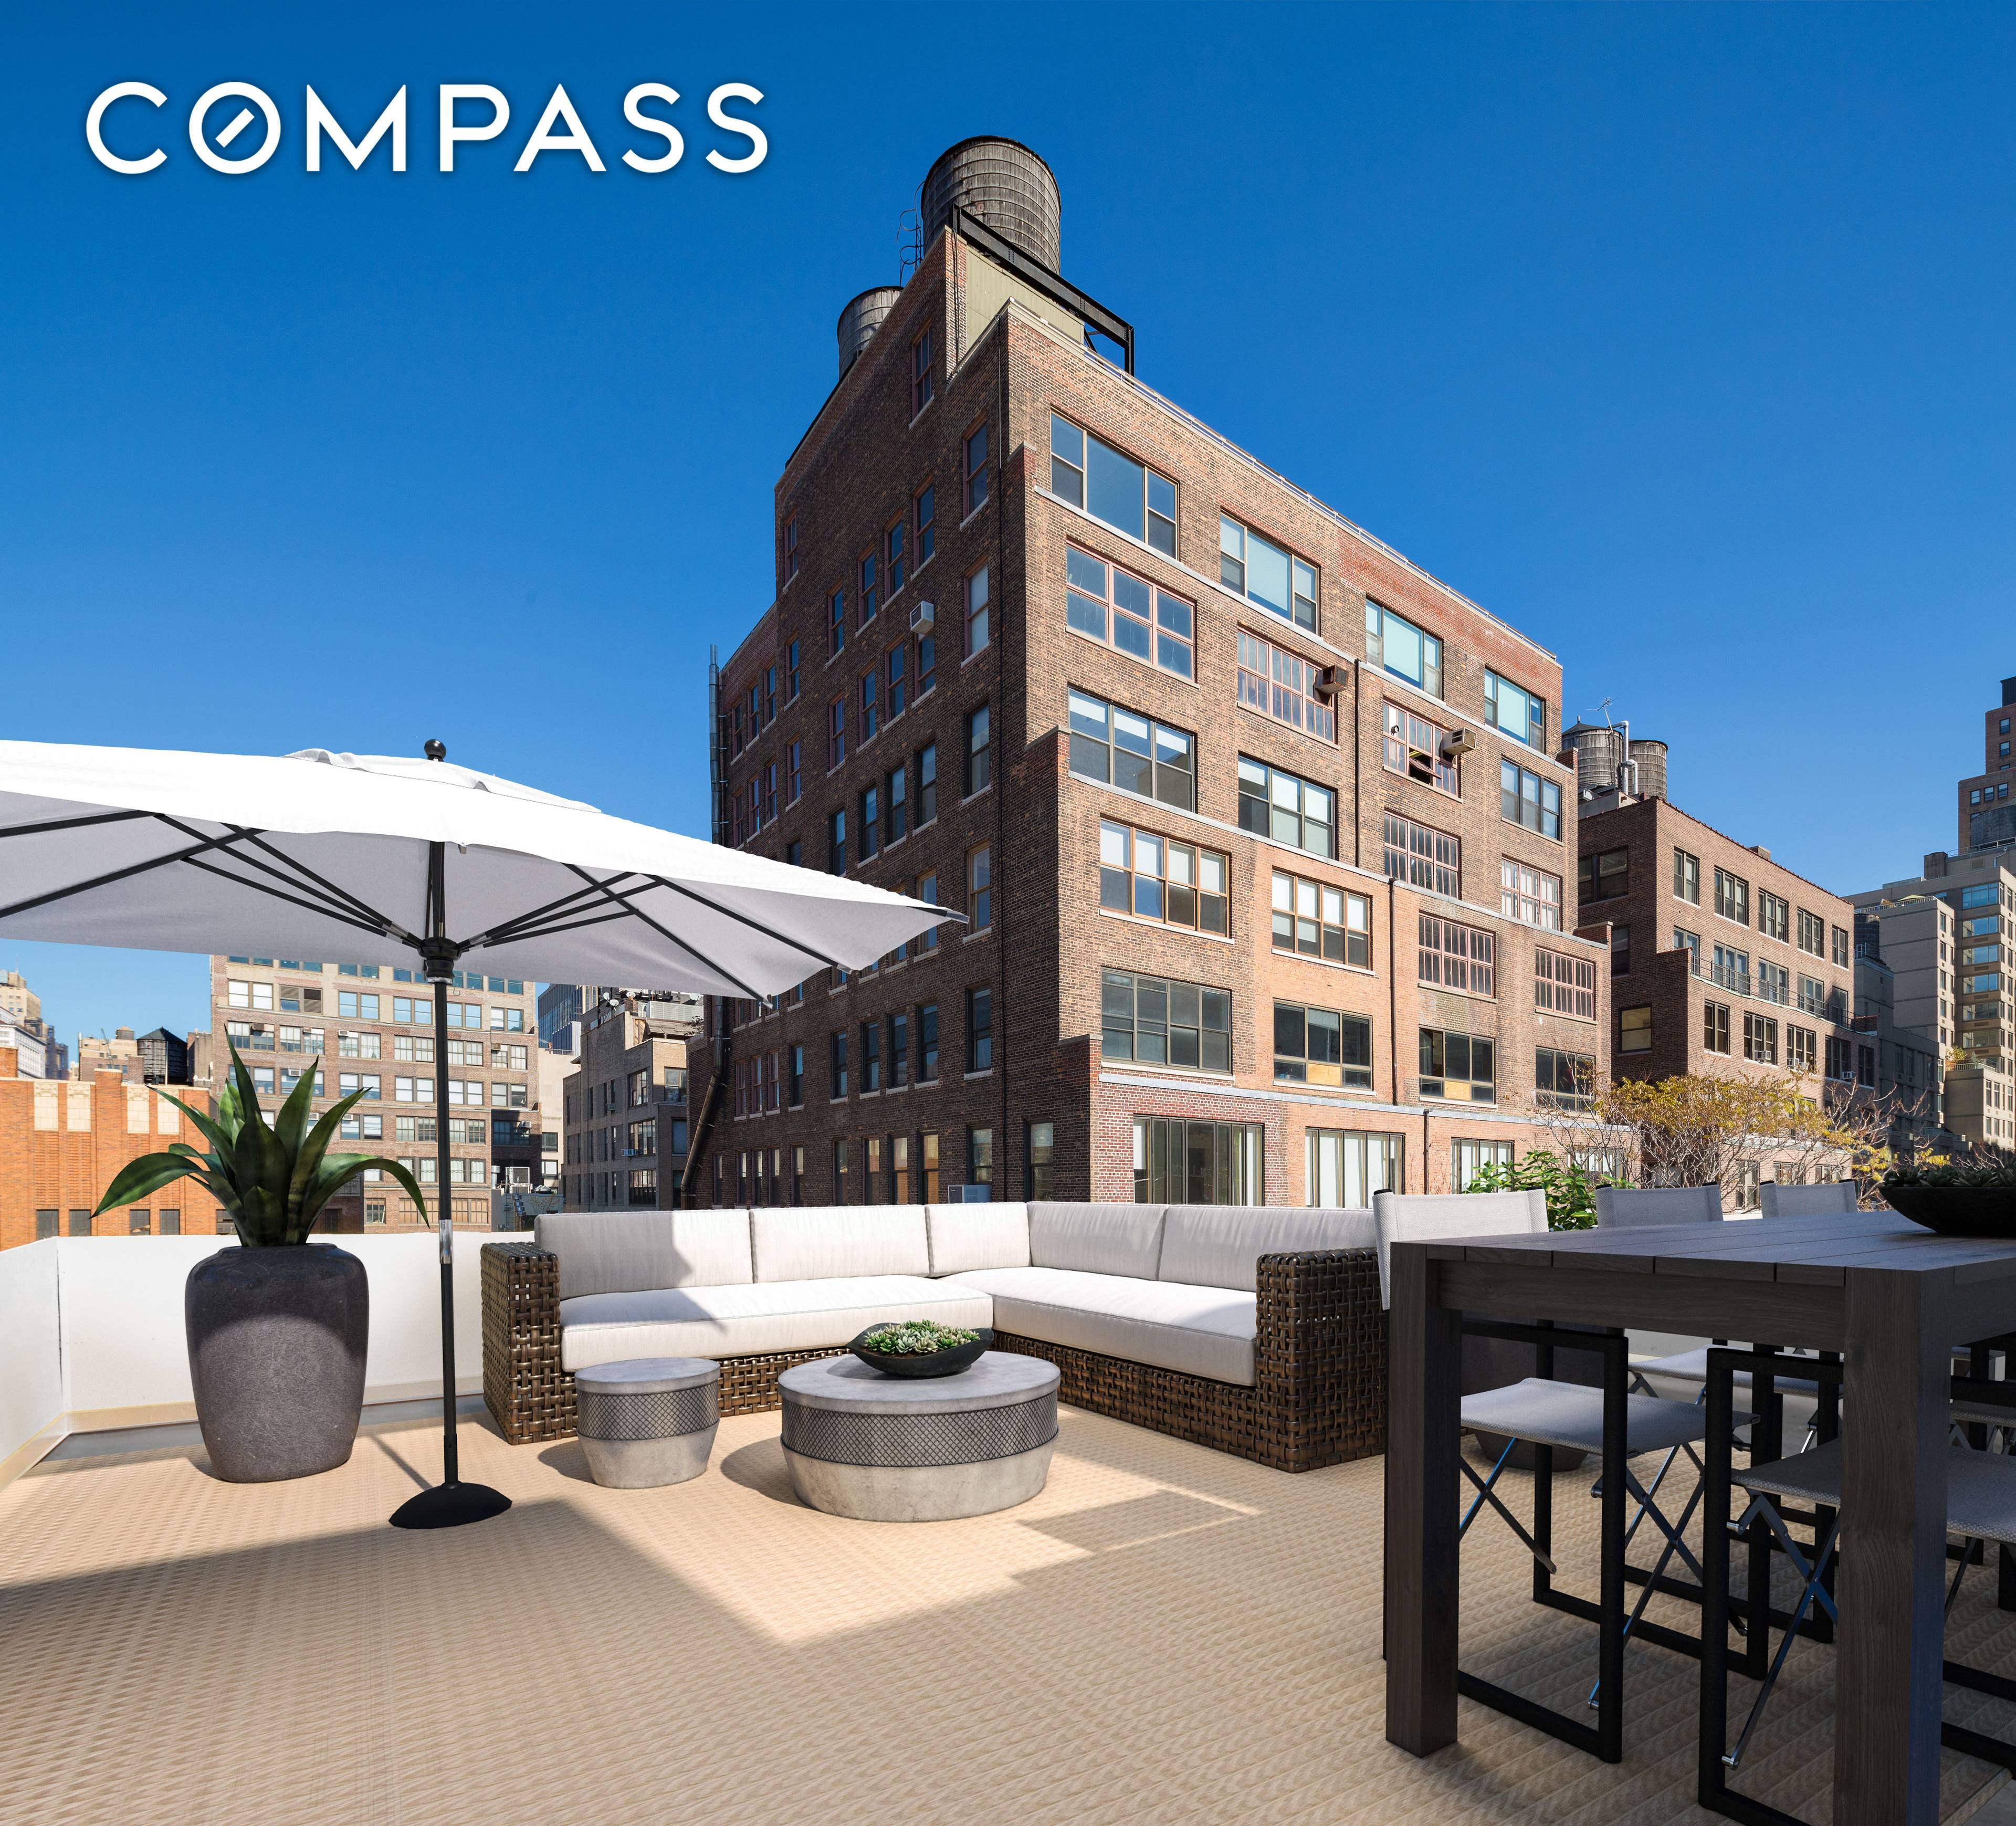 Compass Exclusive Listing CYOF and 1 Month of Free Rent 6690 is net effective pricing on a 12 month lease with one month free rent on a 7300 per month ...